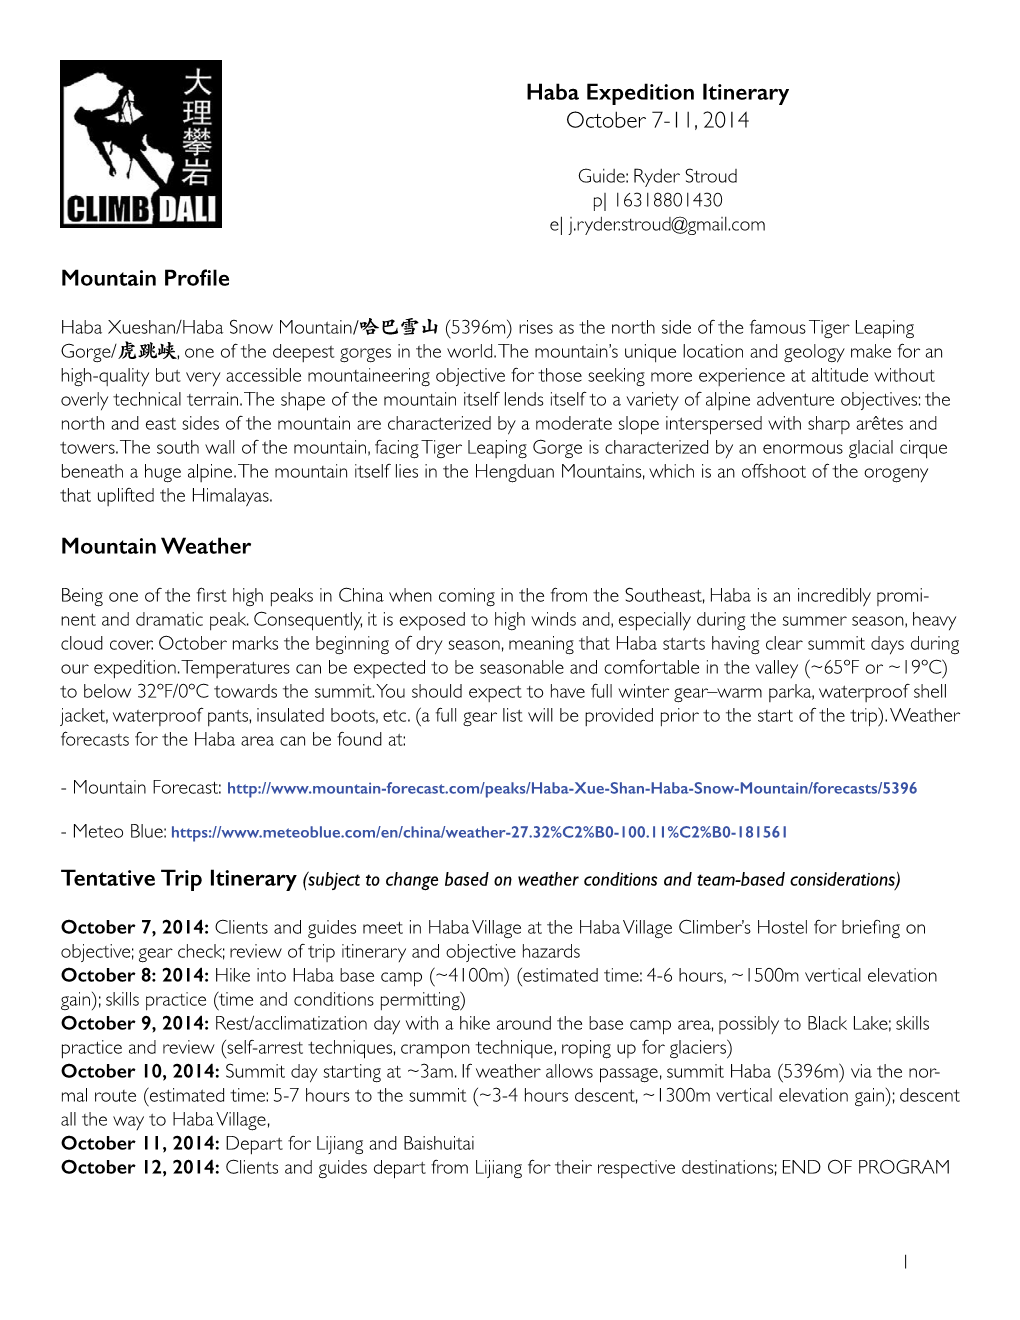 Haba Expedition Itinerary October 7-11, 2014 Mountain Weather